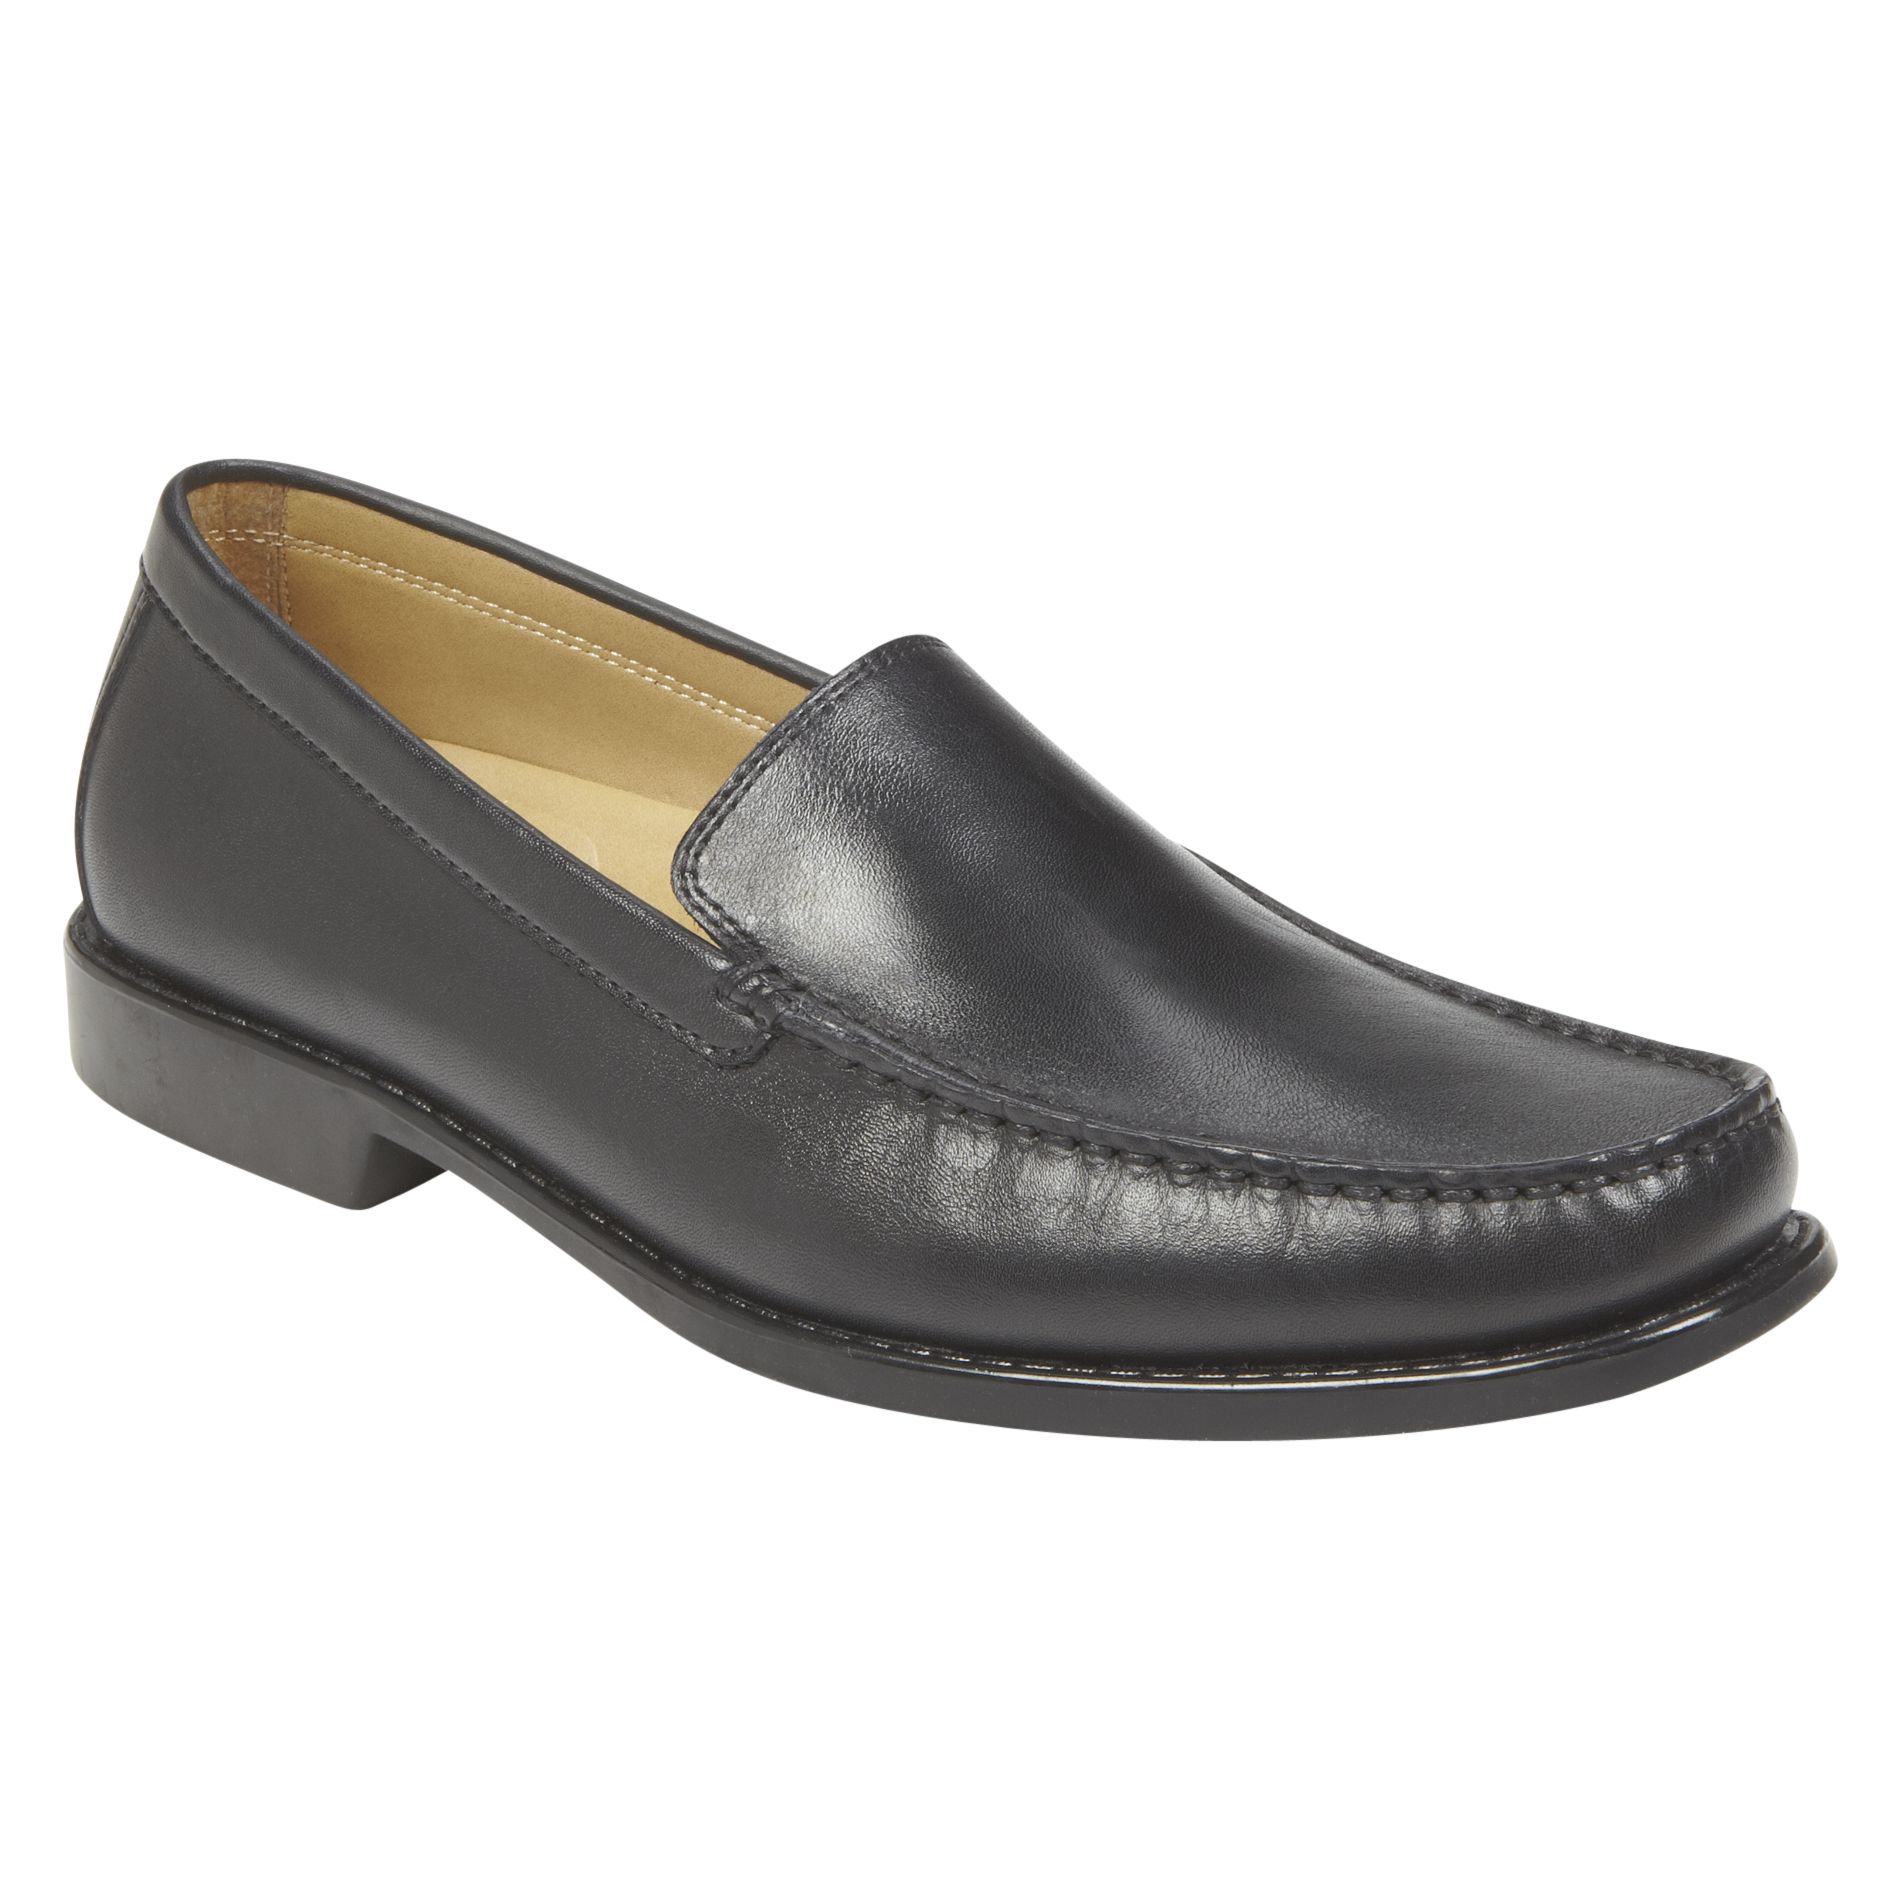 Mens Black Casual Shoe: Everyday Wear from Sears